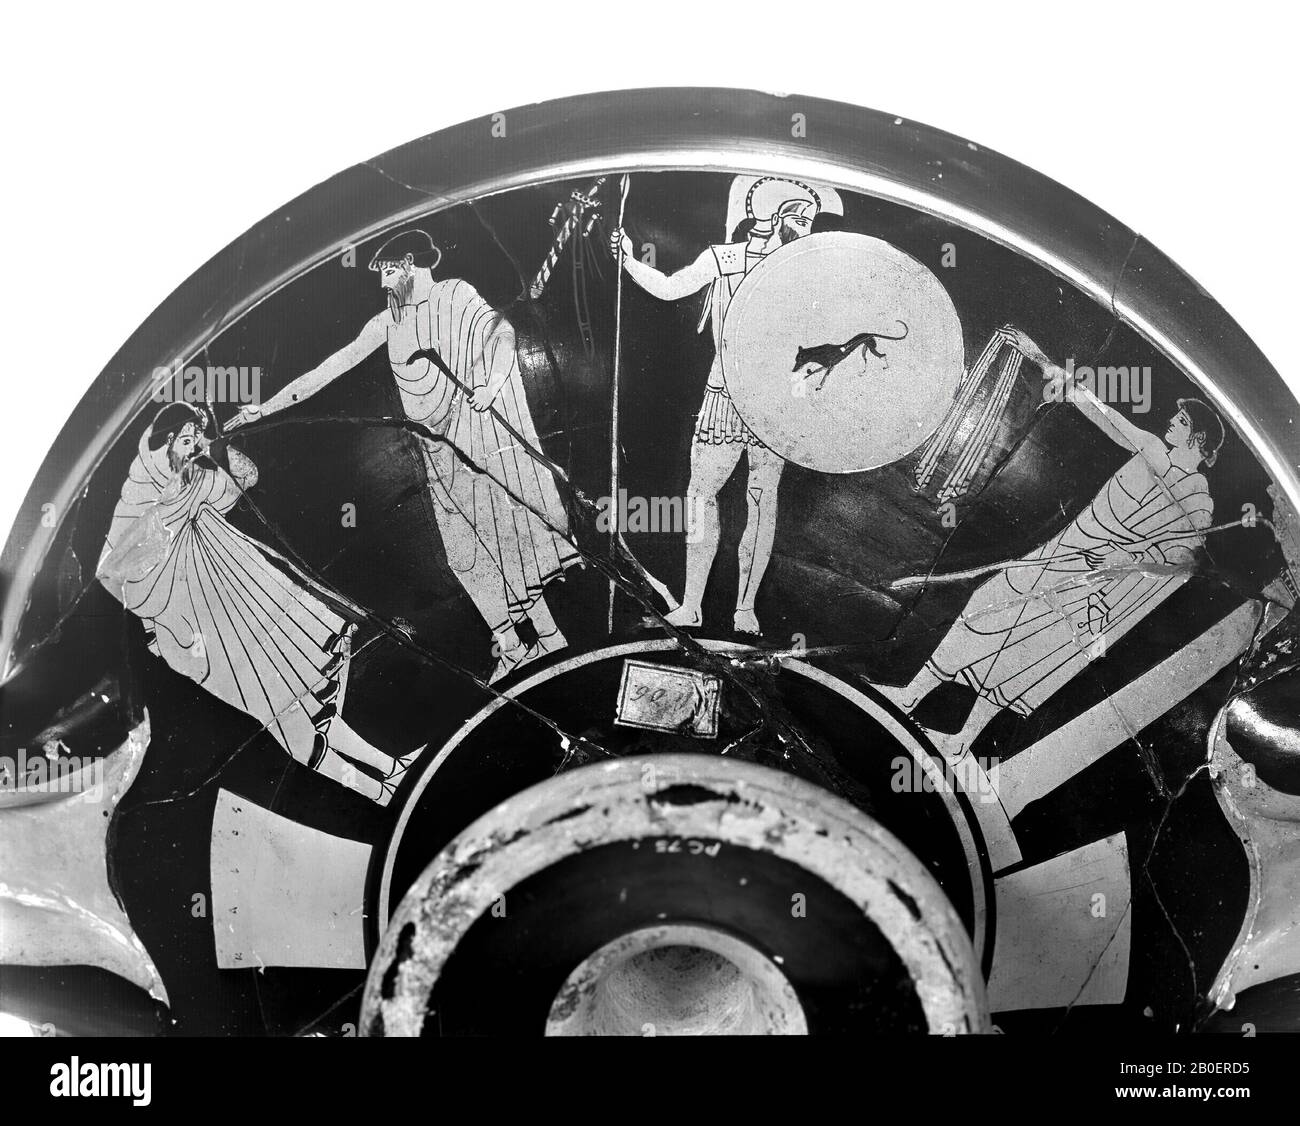 Attic red-figure kylix or cup type C. Inside: voting on the arms of Achilles. Athena present. Outside: A. ditto (3 youths, bearded man, Athena and altar with voting pebbles). B. The aftermath of the voting (Ajax, bearded man, Odysseus and a youth.) Attic red-figured kylix type C. Painter of Louvre G 265. Inside: Voting on who now gets the arms of Achilles in the presence of Athena. about who now gets the arms of Achilles, Ajax or Odysseus Also in the presence of, vase, kylix type C, earthenware, red-figure, Attic, 11.8 cm, ø 26.9 cm, red-figure, Attic, Painter or Louvre G 265 -480 Stock Photo